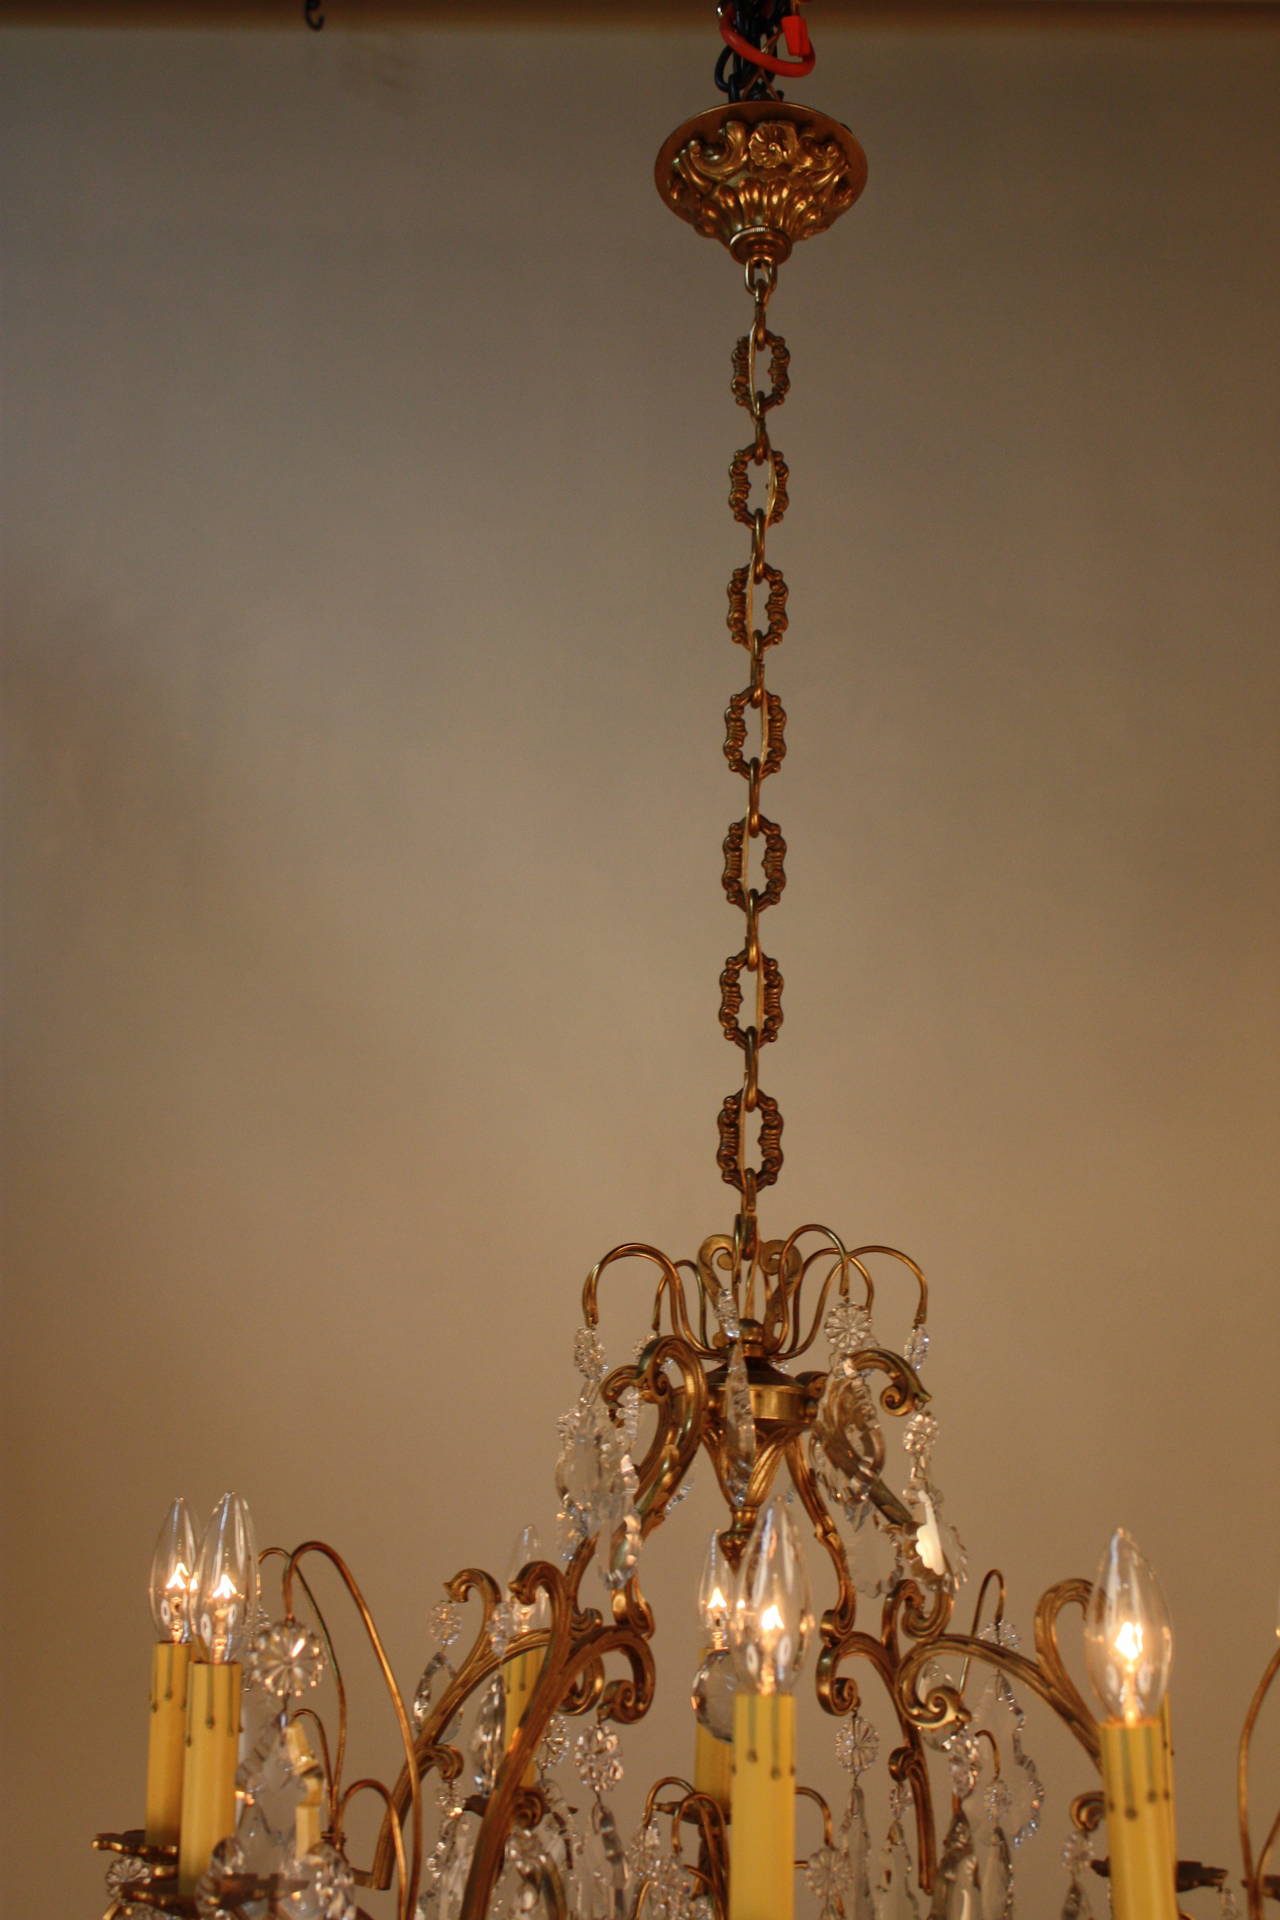 Bronze French Crystal Chandelier